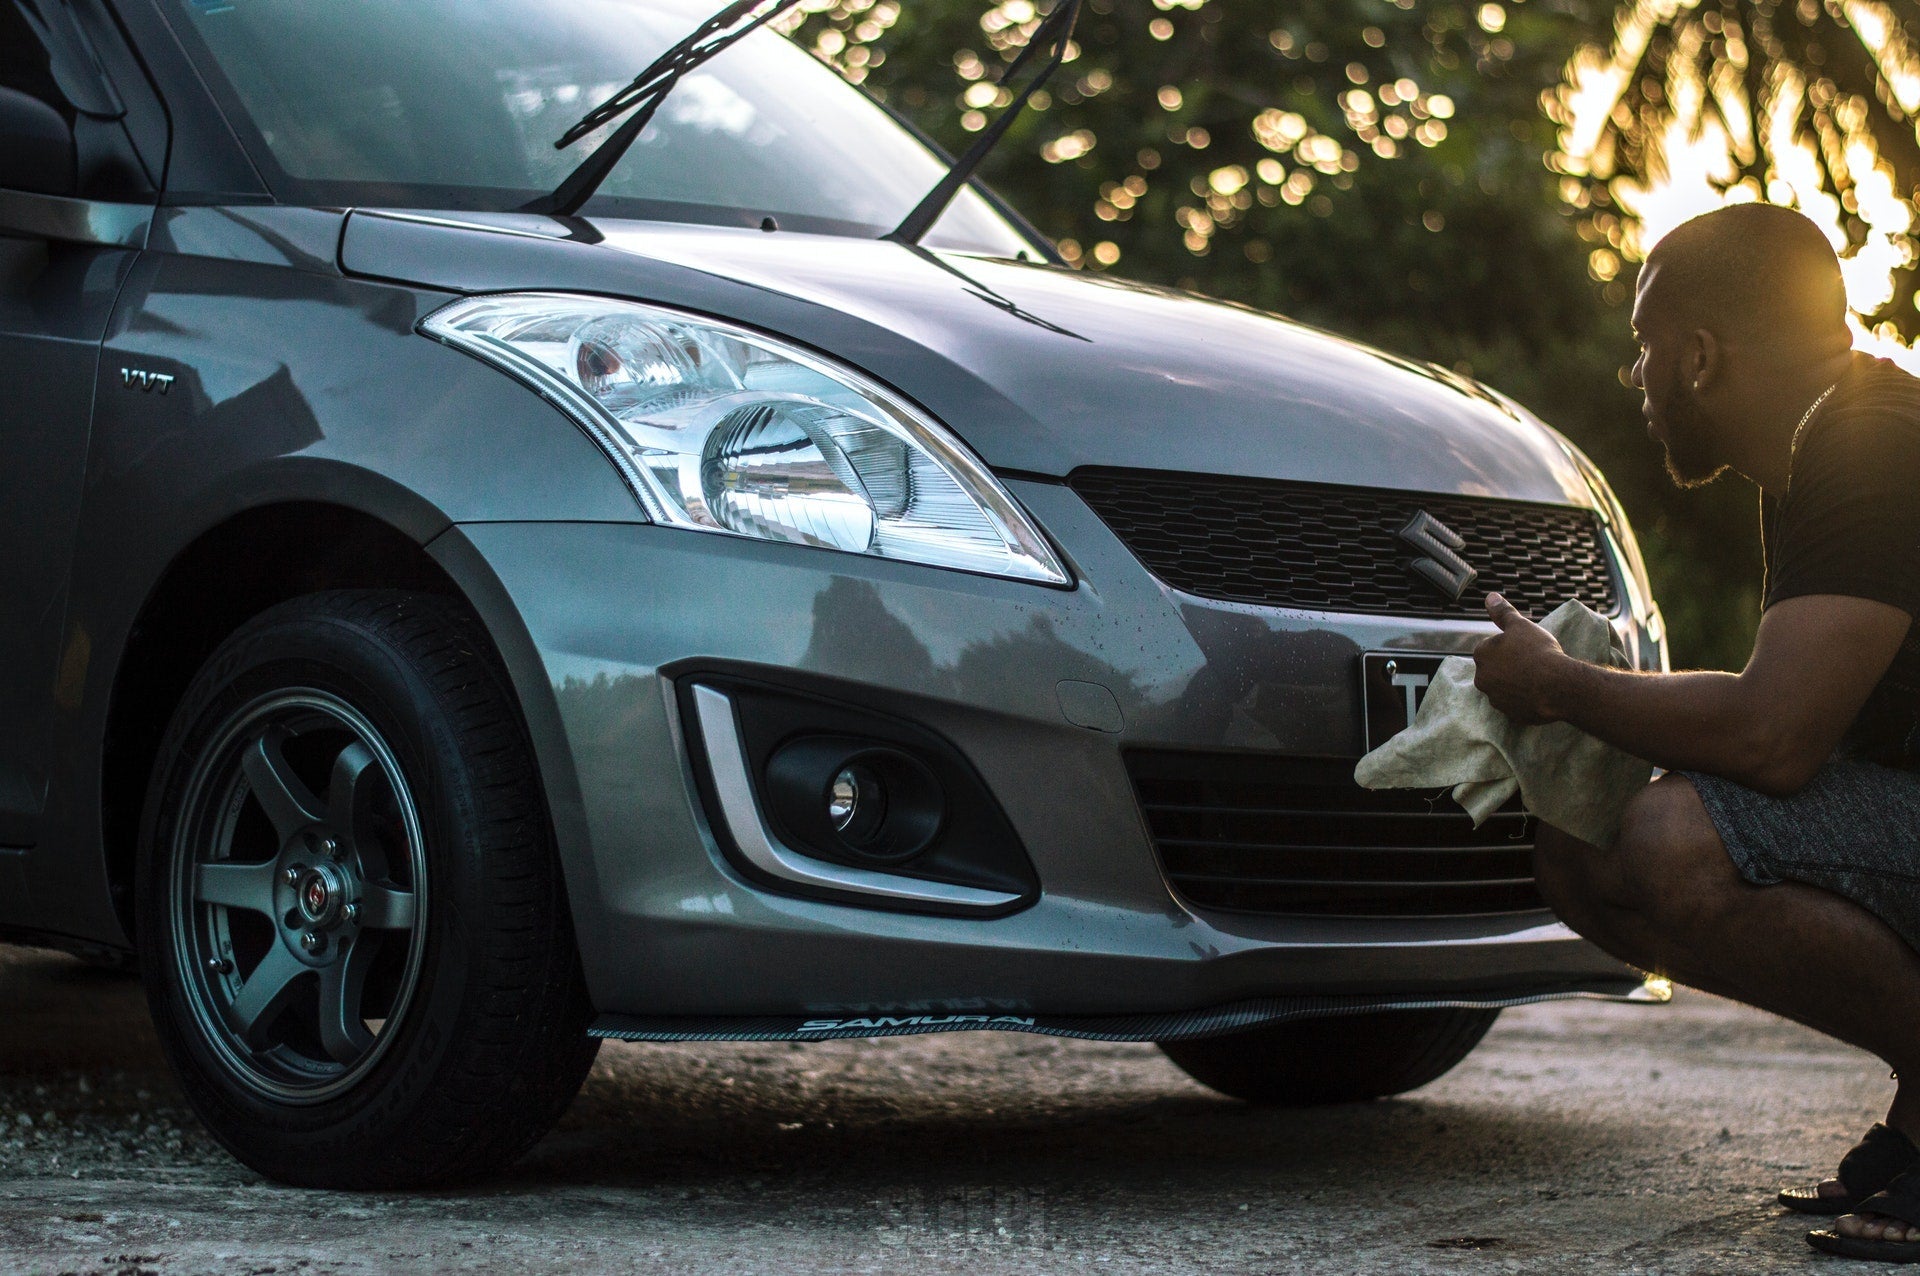 When it comes to cleaning your car, we know convenience and ease